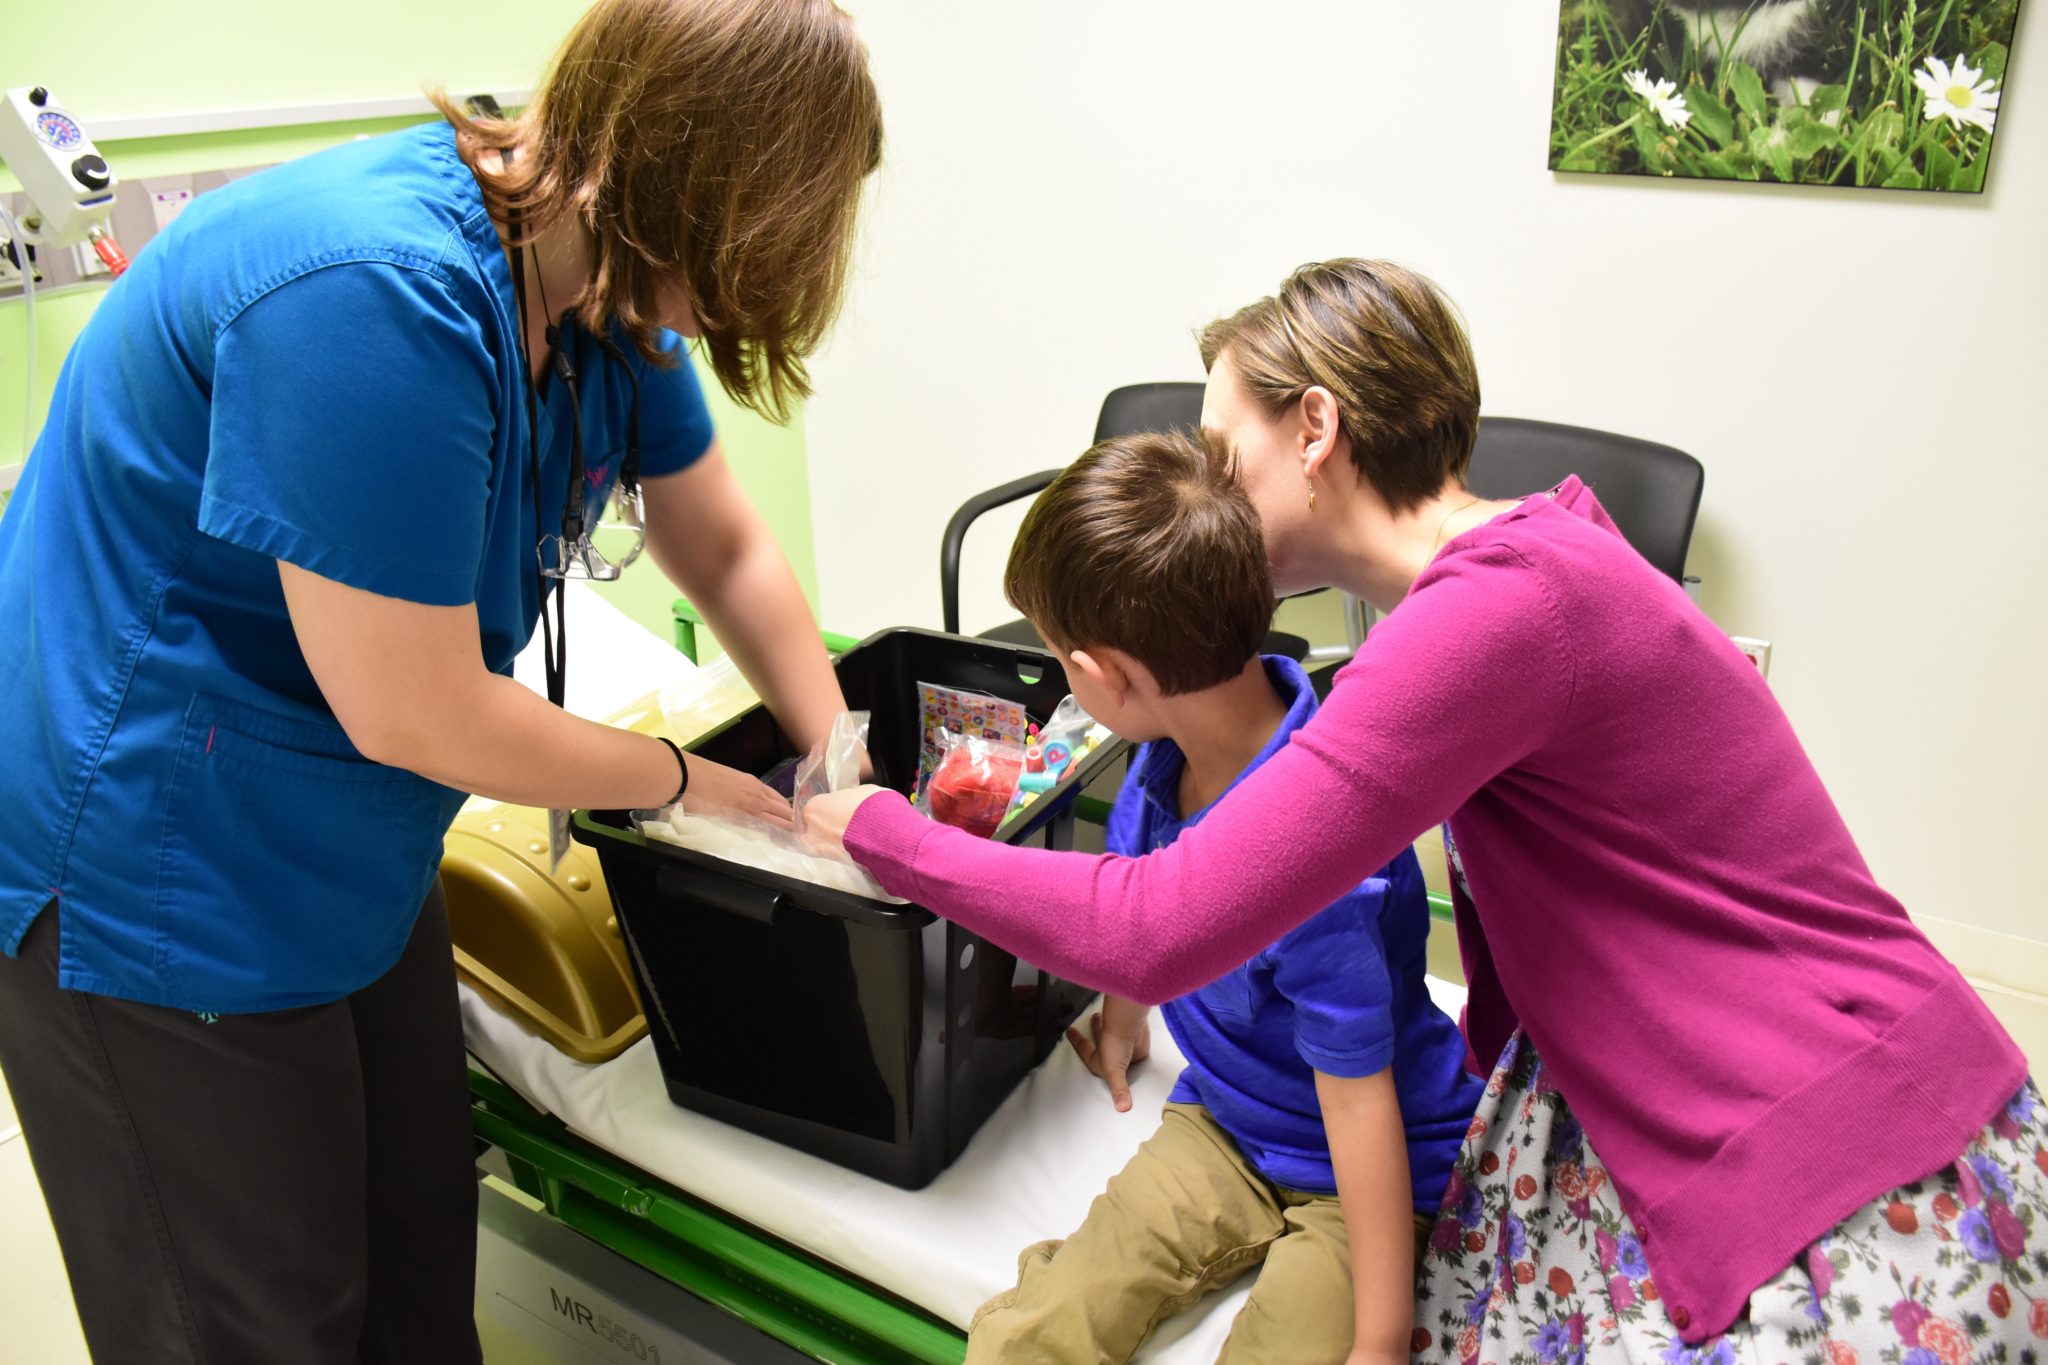 A boy goes through the treasure chest with his mother after an MRI exam